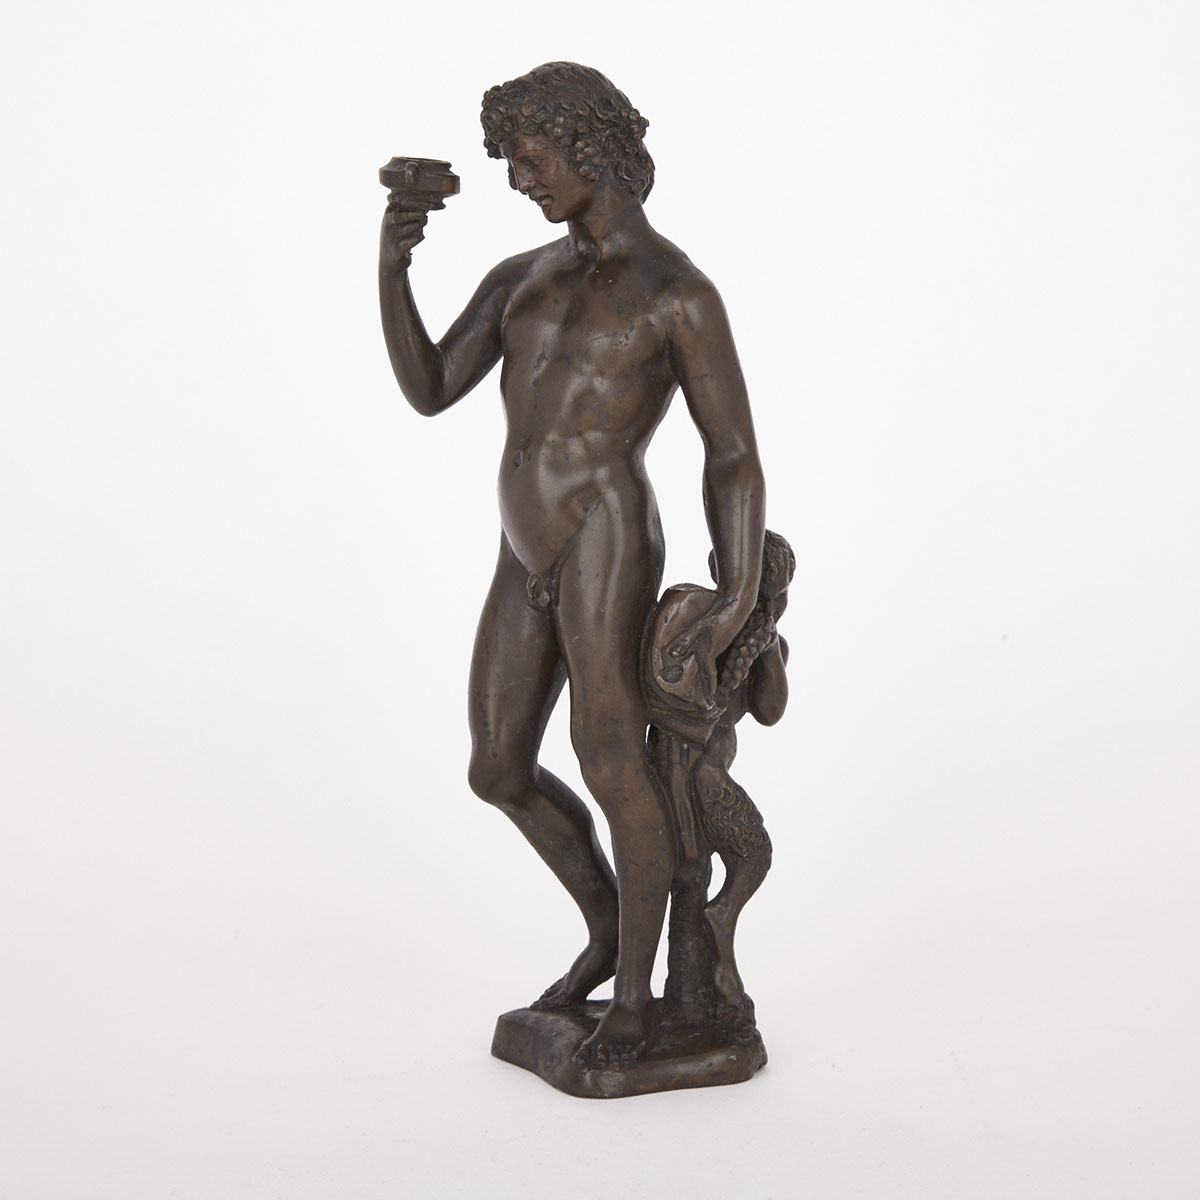 Italian ‘Grand Tour Souvenir’ Patinated Bronze Figure of Bacchus with Faun, after the model by Michelangelo, 19th century